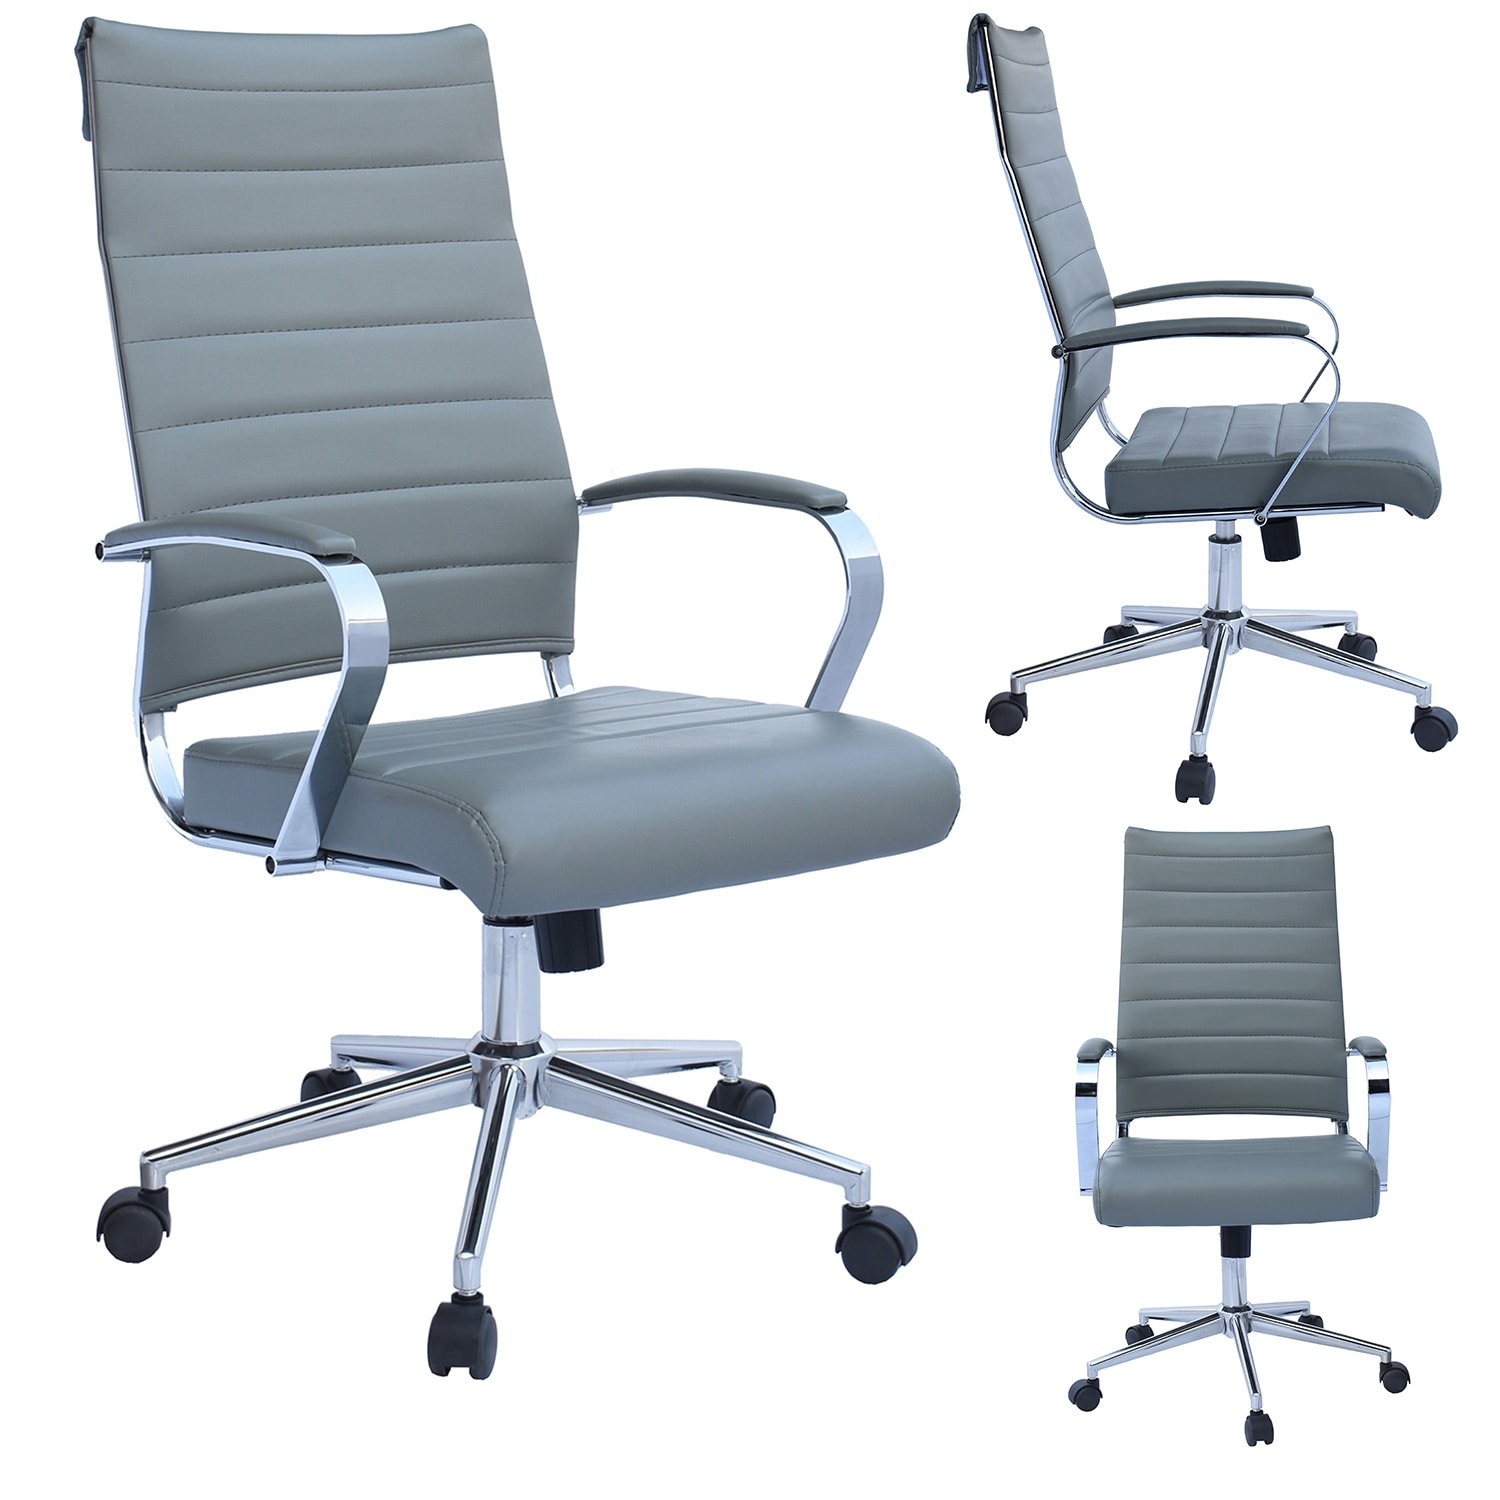 Modern Mid Back Executive Chair Ivory - Boss Office Products